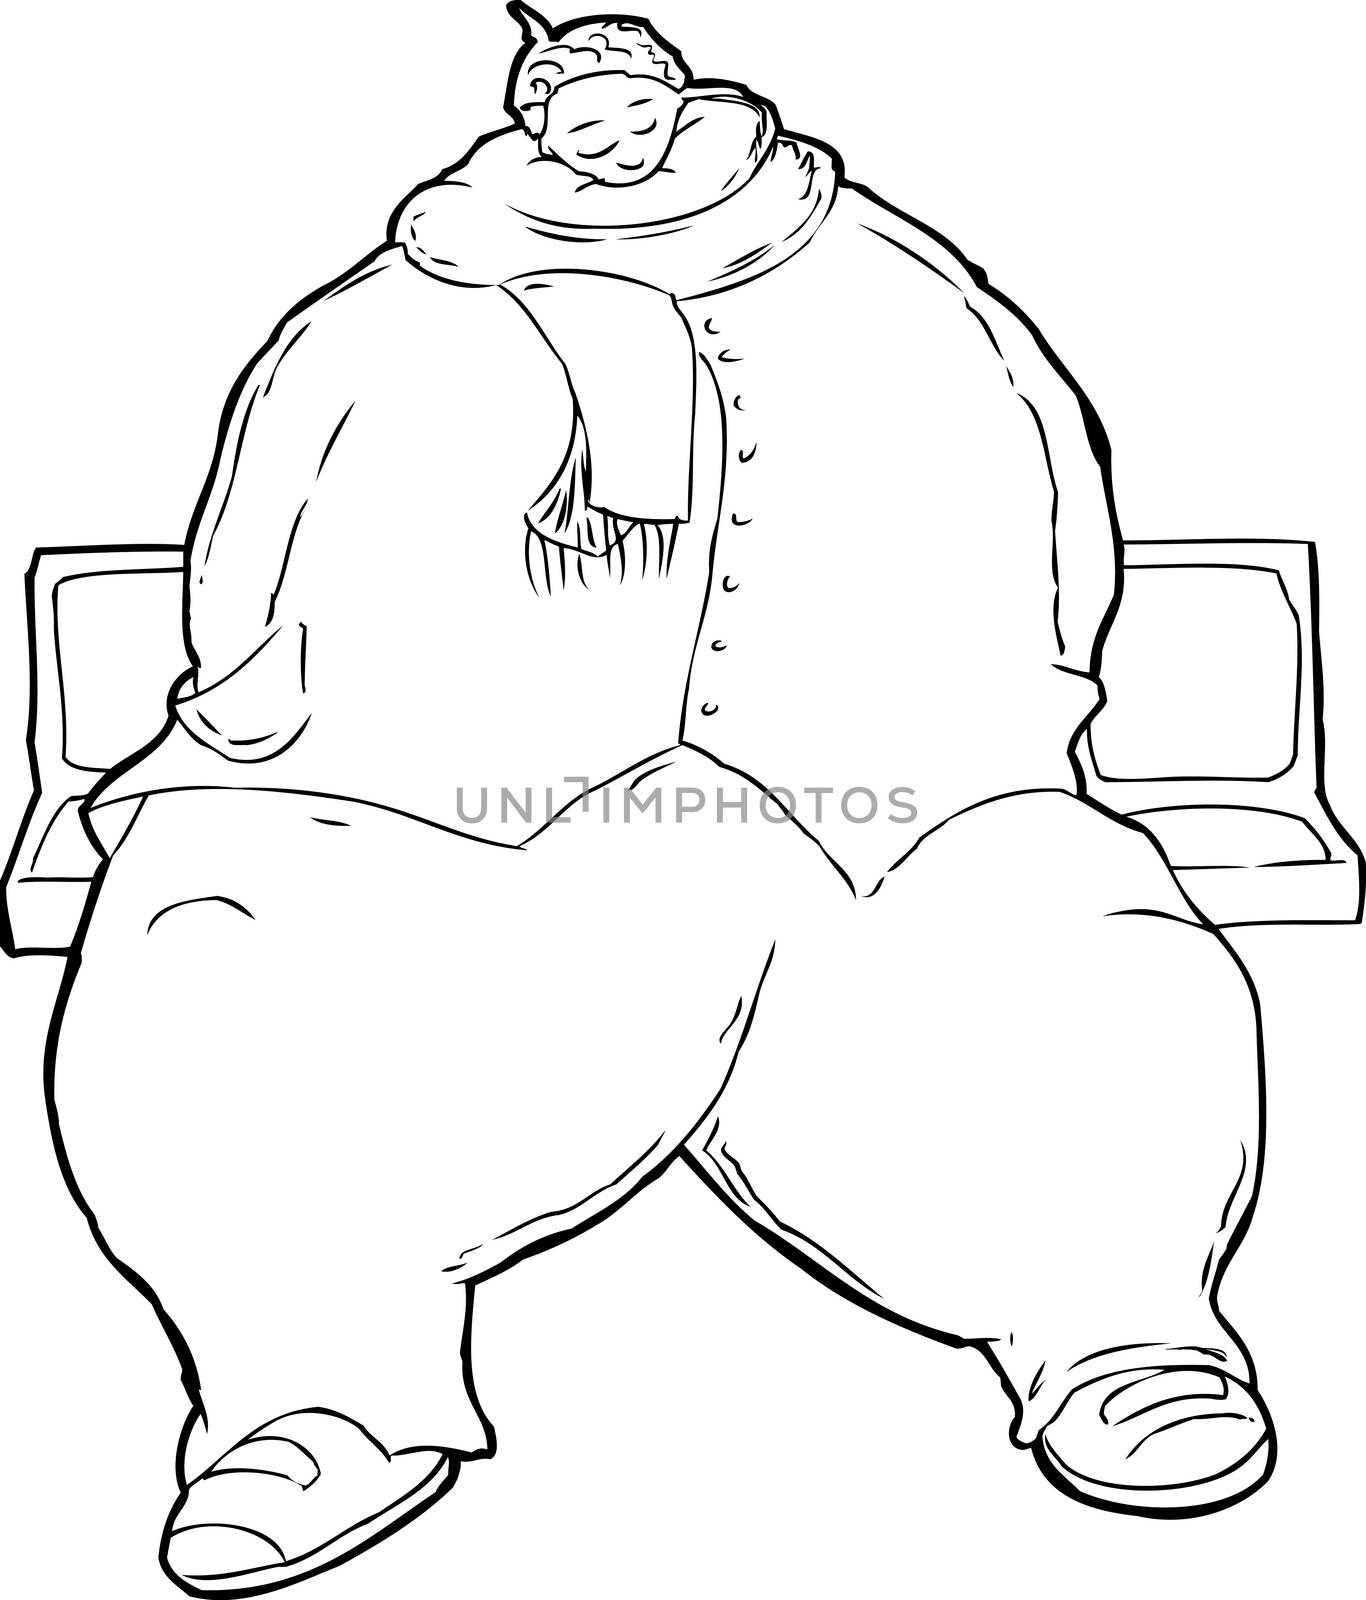 Outline of overweight Black woman sitting in row of bus or train seats